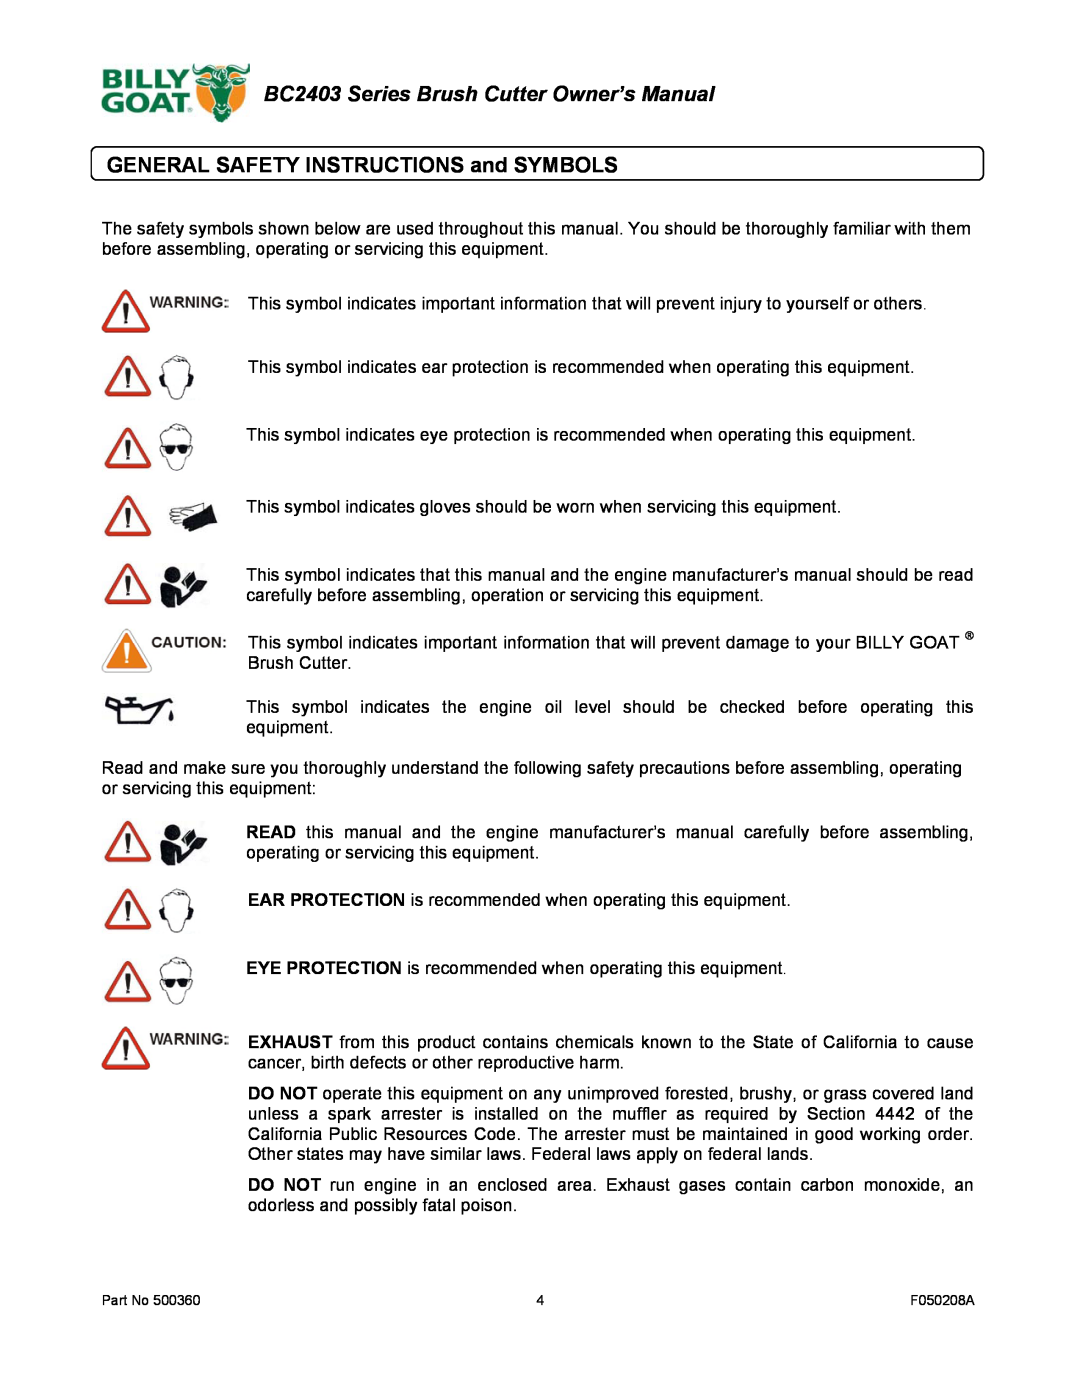 Billy Goat owner manual GENERAL SAFETY INSTRUCTIONS and SYMBOLS, BC2403 Series Brush Cutter Owner’s Manual 